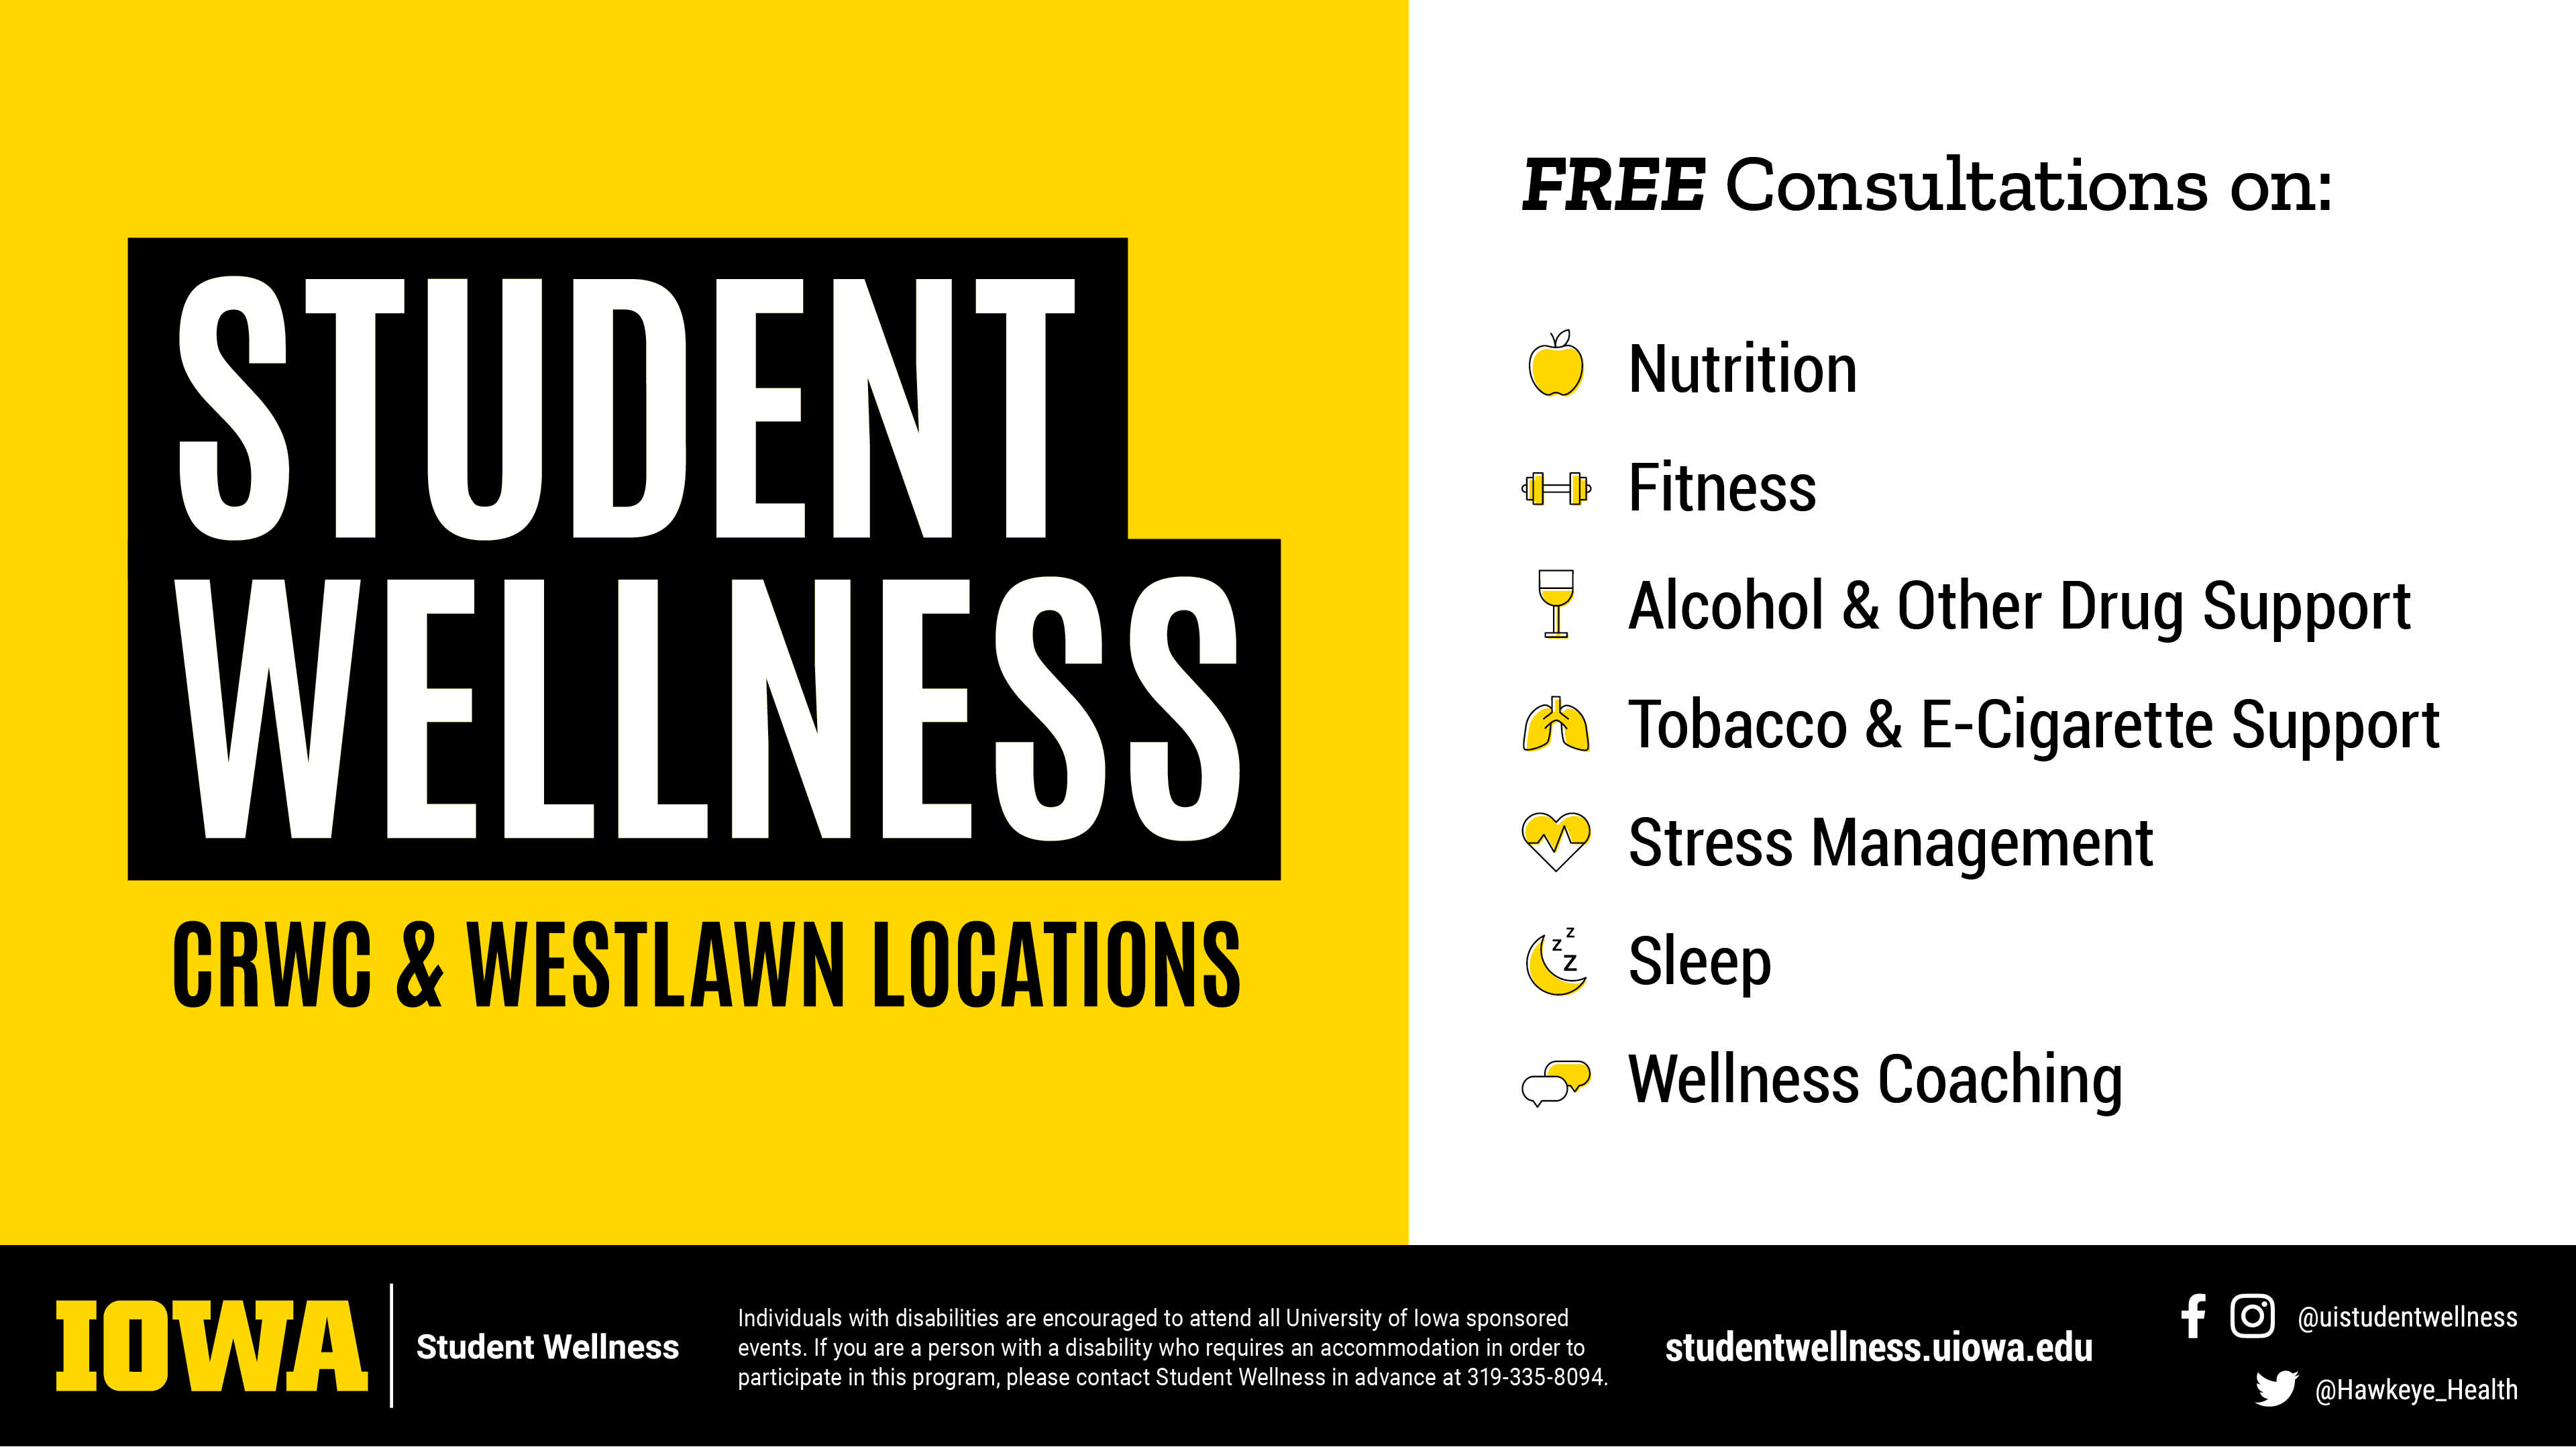 Free consultations at Student Wellness on nutrition, fitness, alcohol & other drug support, tobacco & e-cigarette support, stress management, sleep, and wellness coaching; available at the CRWC and Westlawn locations